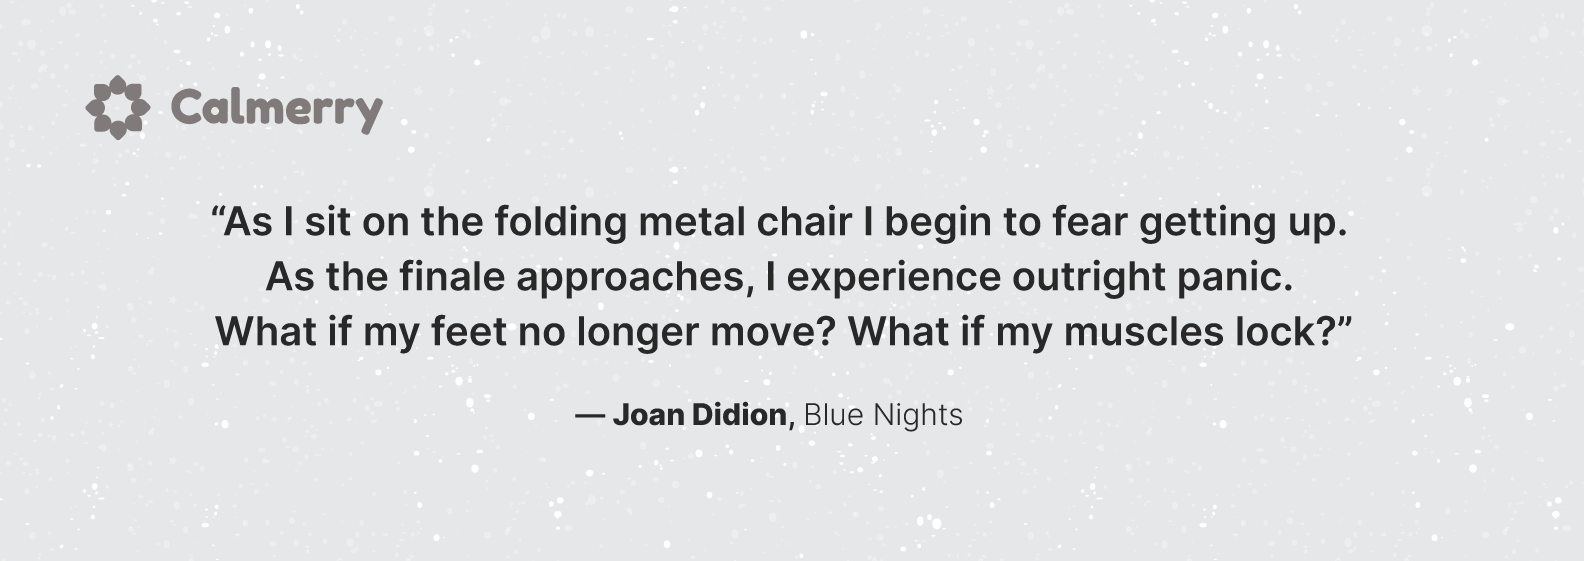 Joan Didion, Blue Nights quote